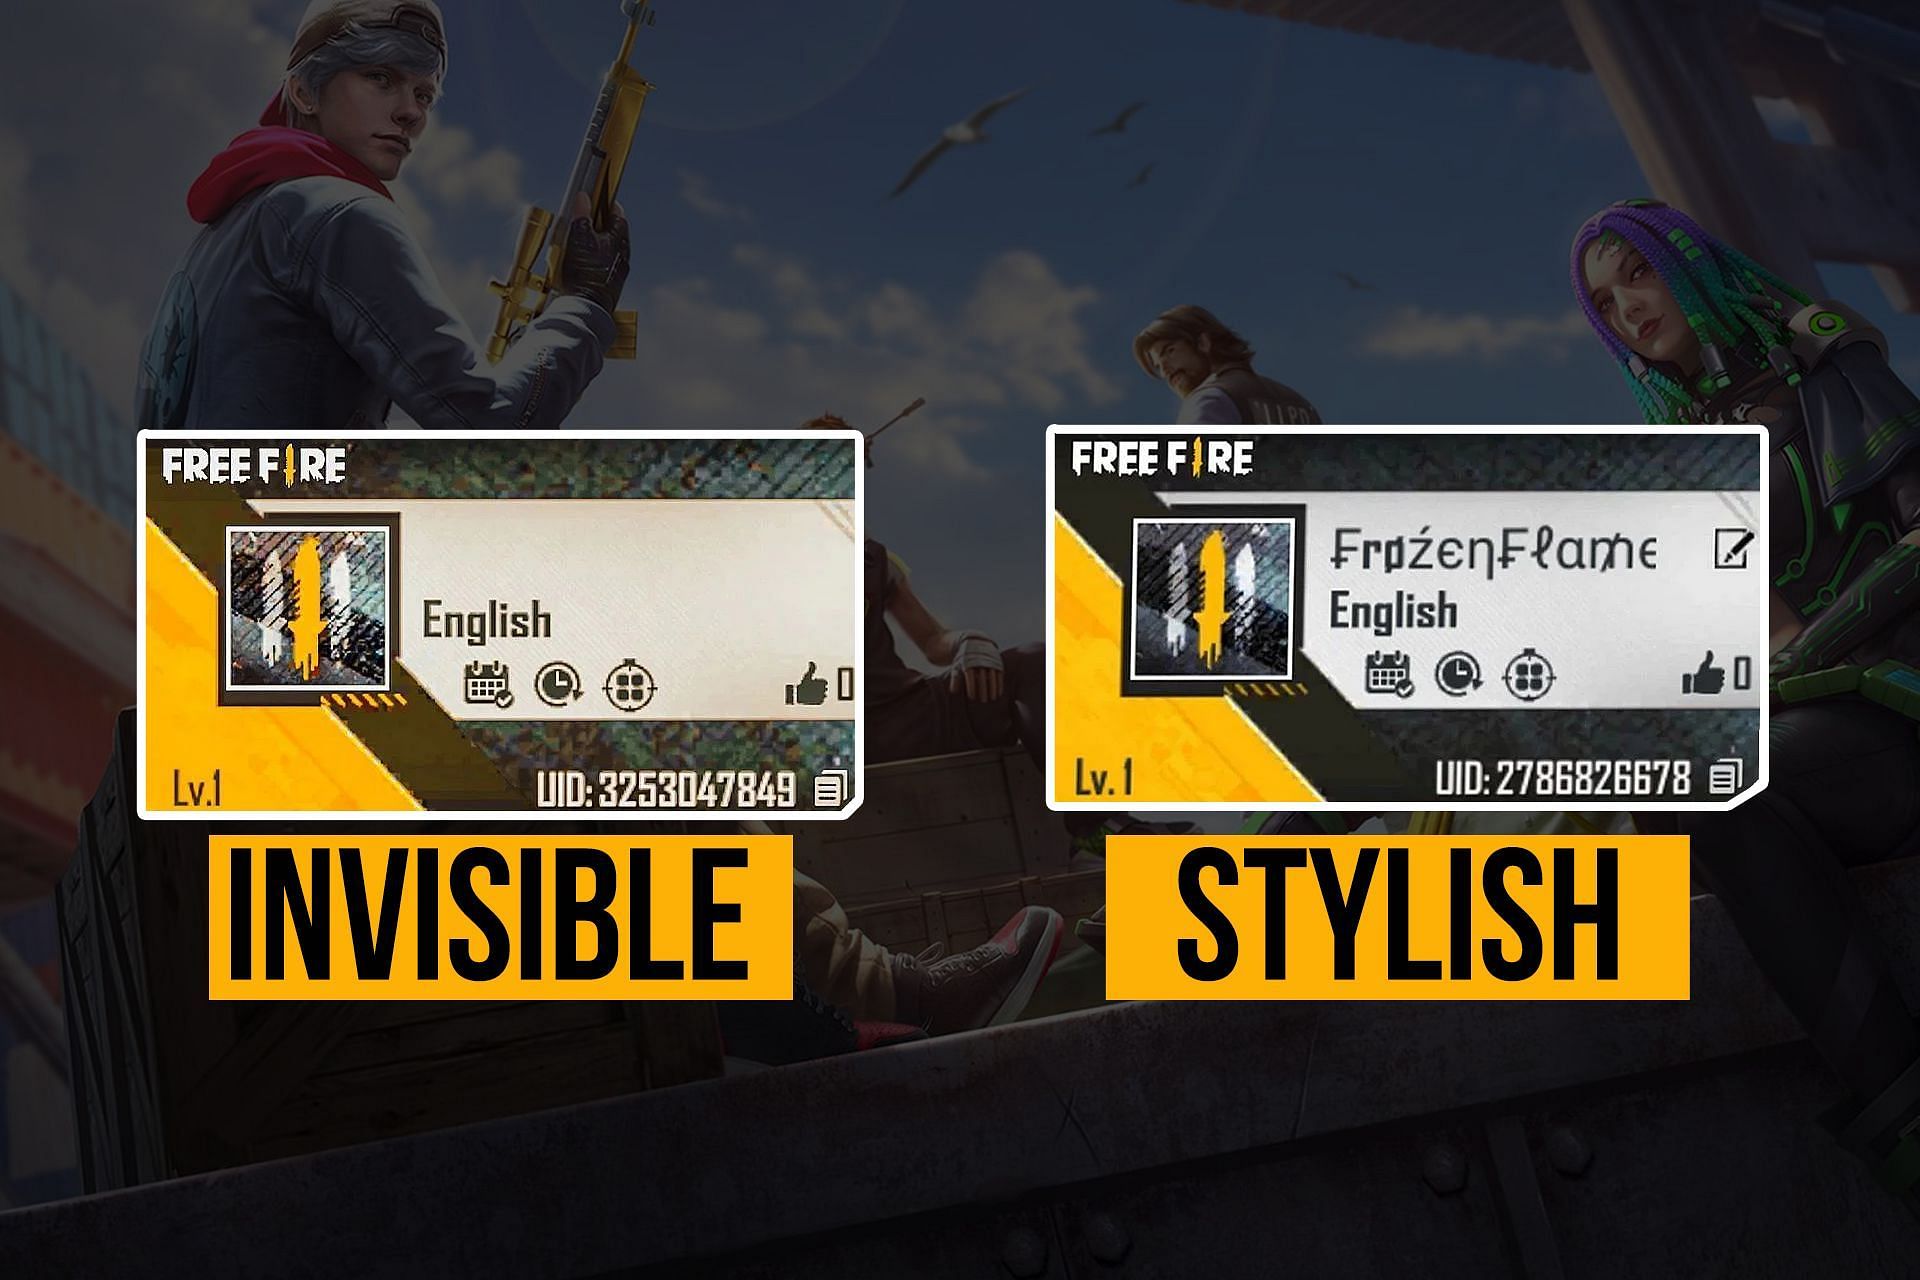 Gamers frequently search for ways to get invisible and stylish names (Image via Sportskeeda)